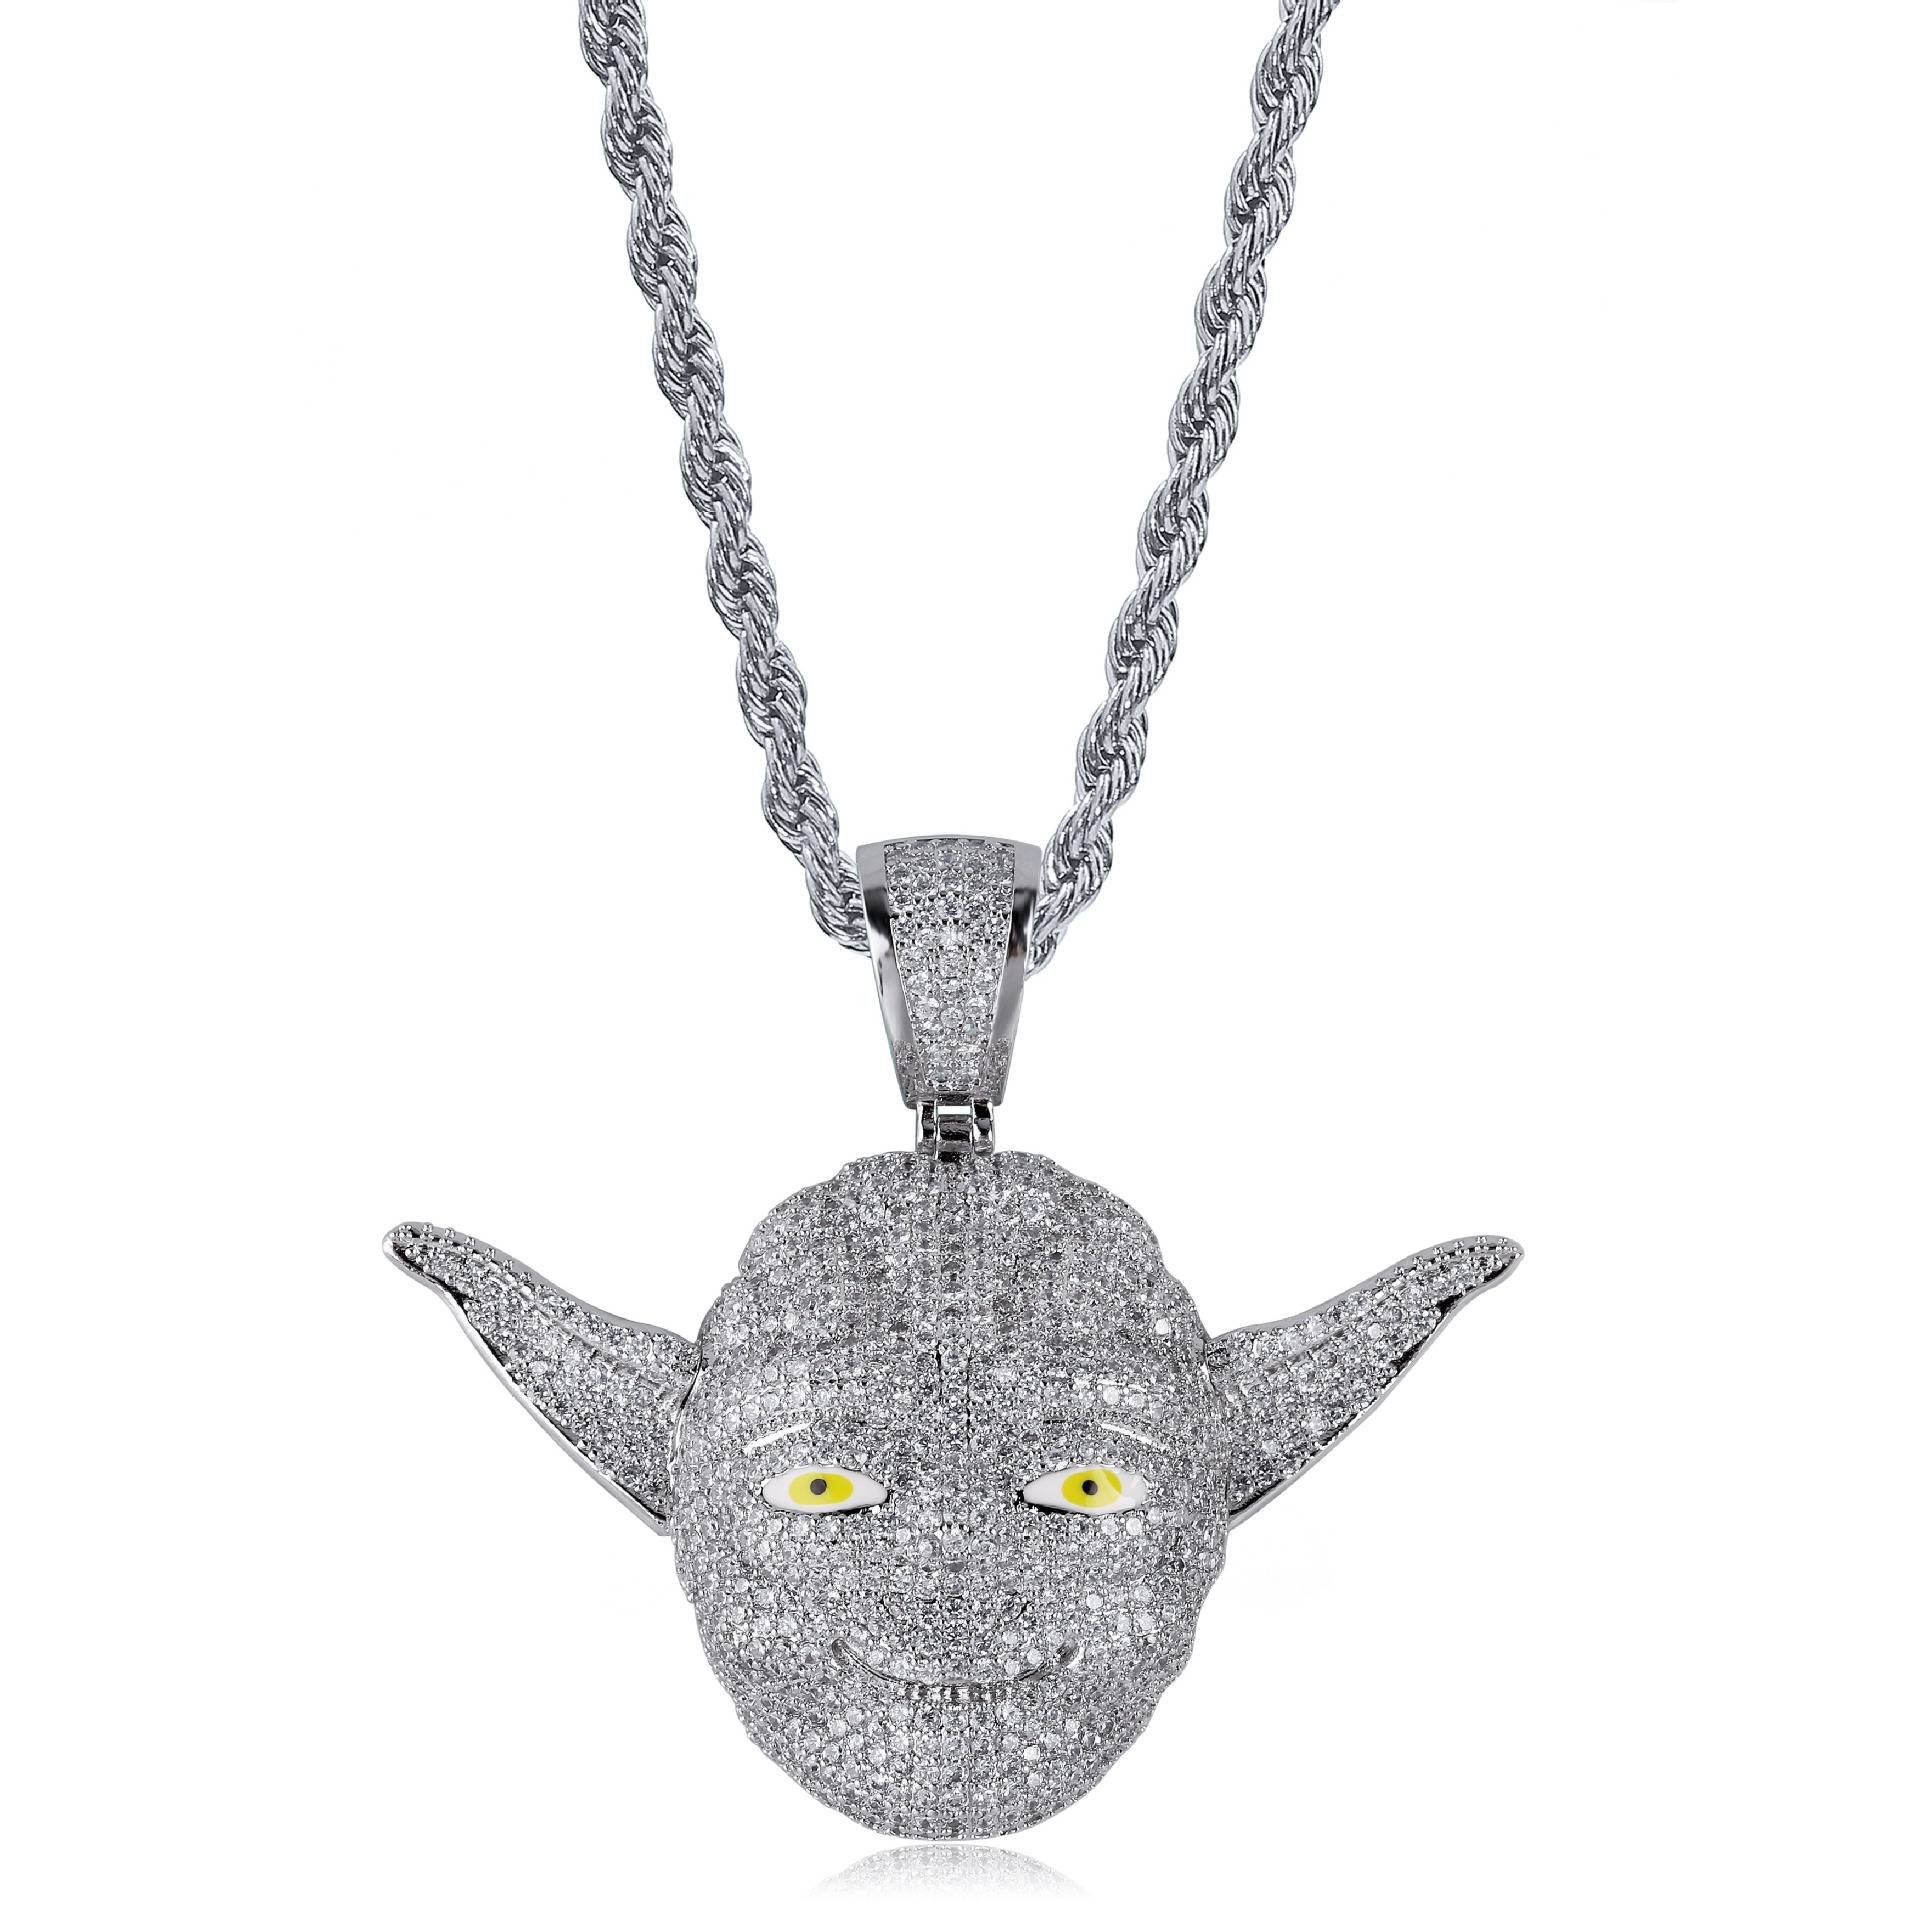 Iced Out Master Yoda Pendant Necklace New Arrival AAA Cubic Zirconia Mens Necklace Fashion Hip Hop Jewelry